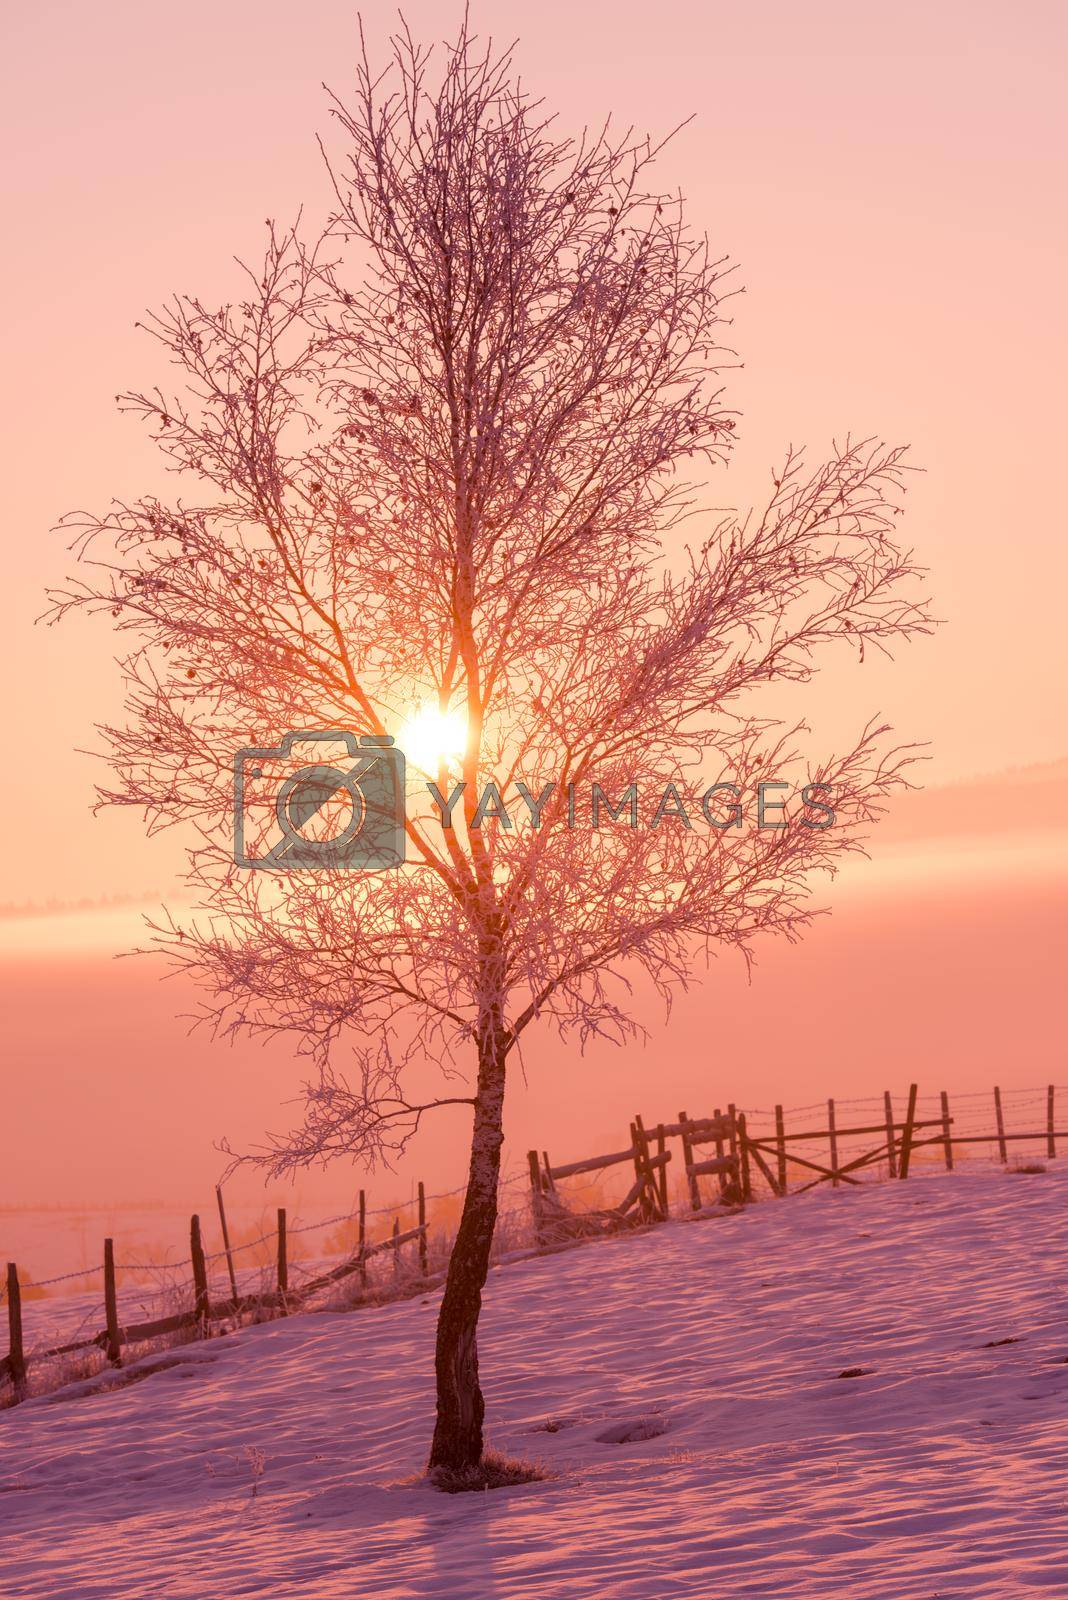 winter landscape scenic  with lonely tree and fresh snow  against purple violet  sky with long shadows on beautiful fresh morning